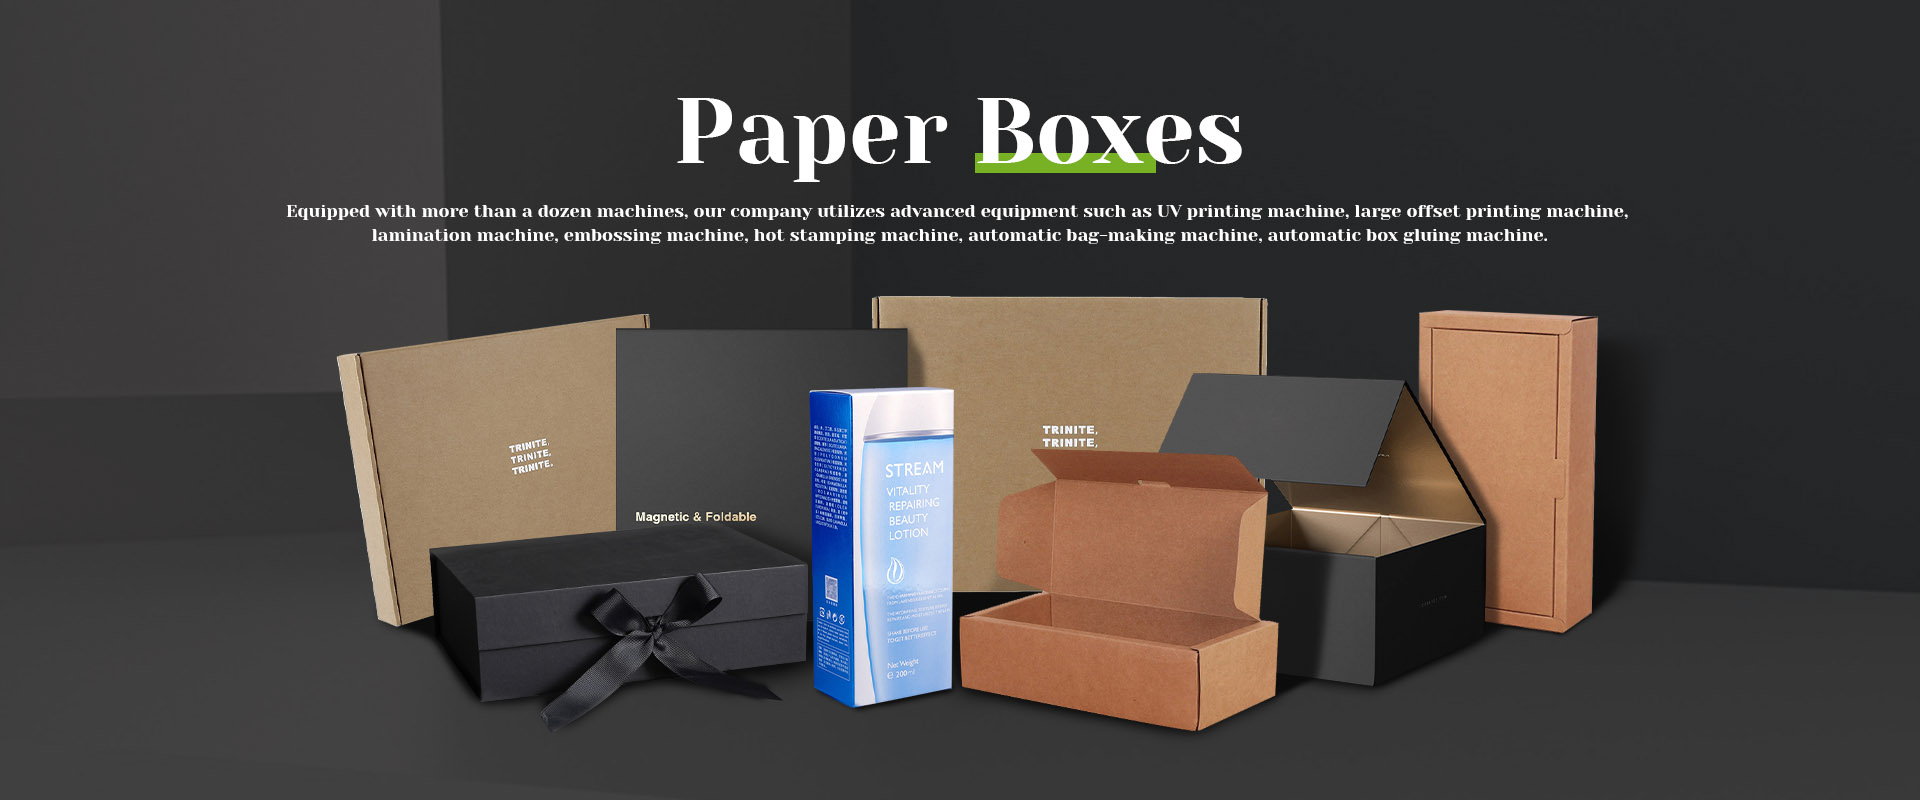 Paper Boxes Manufacturers